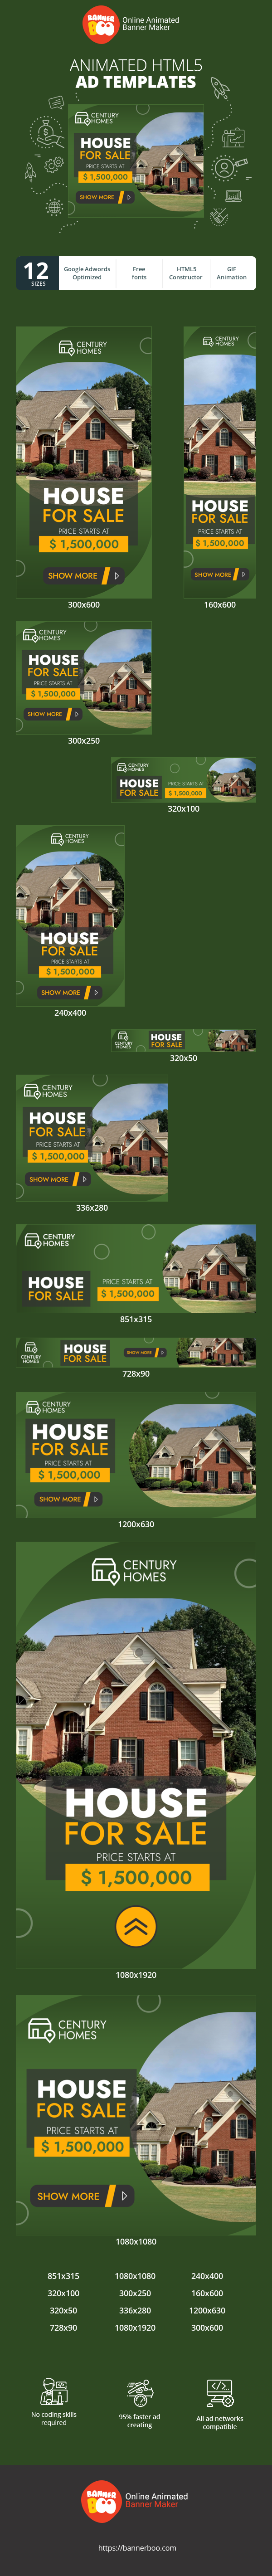 Banner ad template — House For Sale — Price Starts At $1,500,000